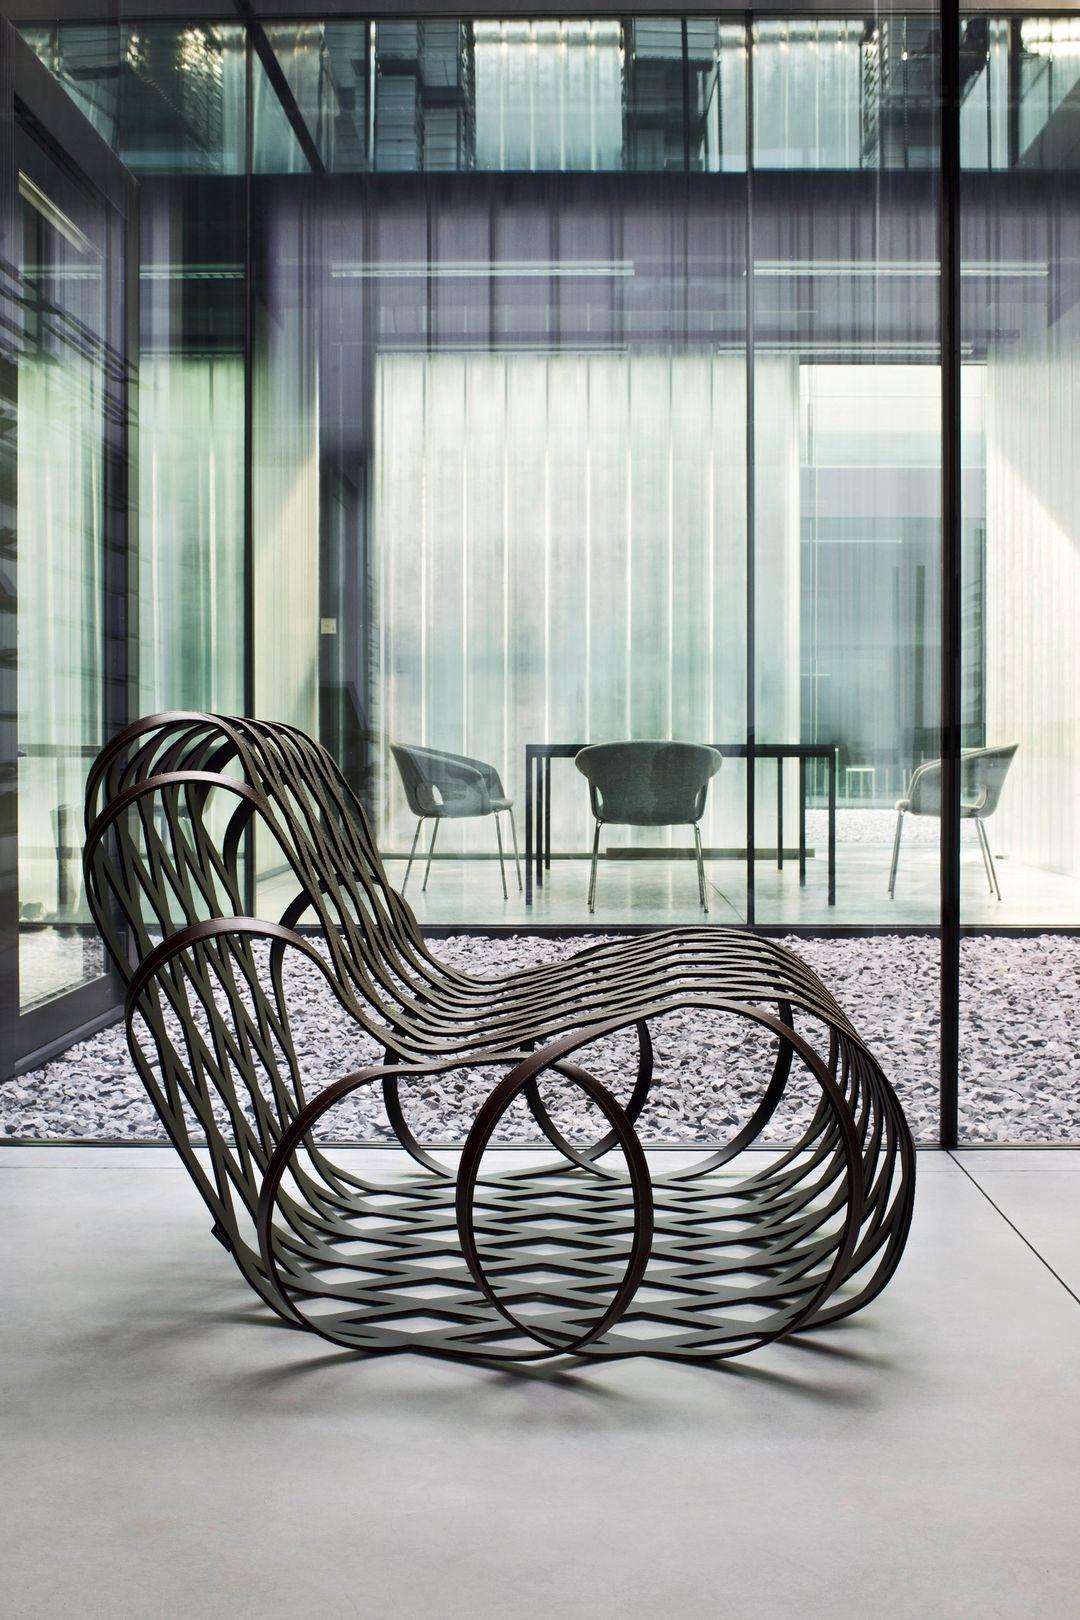 Aria, a new chaise longue designed by Antonio Rodriguez for La Cividina.? This collaborative effort combines advanced technology and craftsmanship.? The Aria chair is produced by precisely laser cutting a sheet of steel to create rhombuses that form